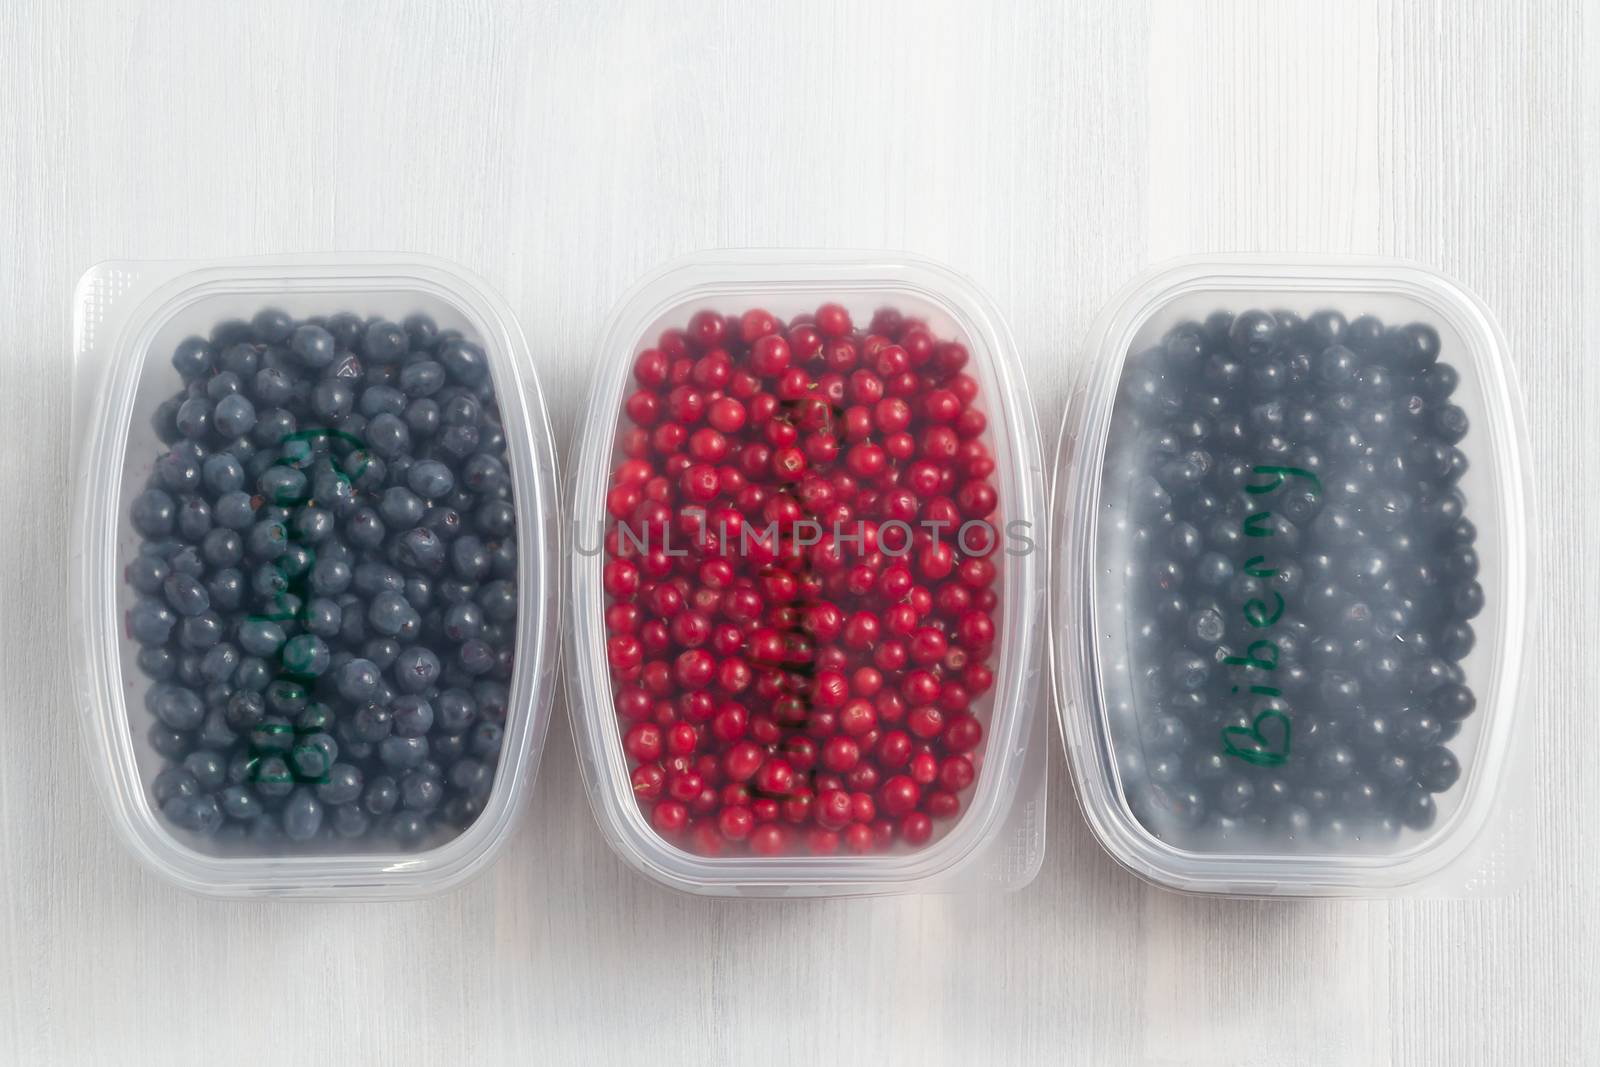 Berries laid out in containers and prepared for freezing and storage, top view by galsand